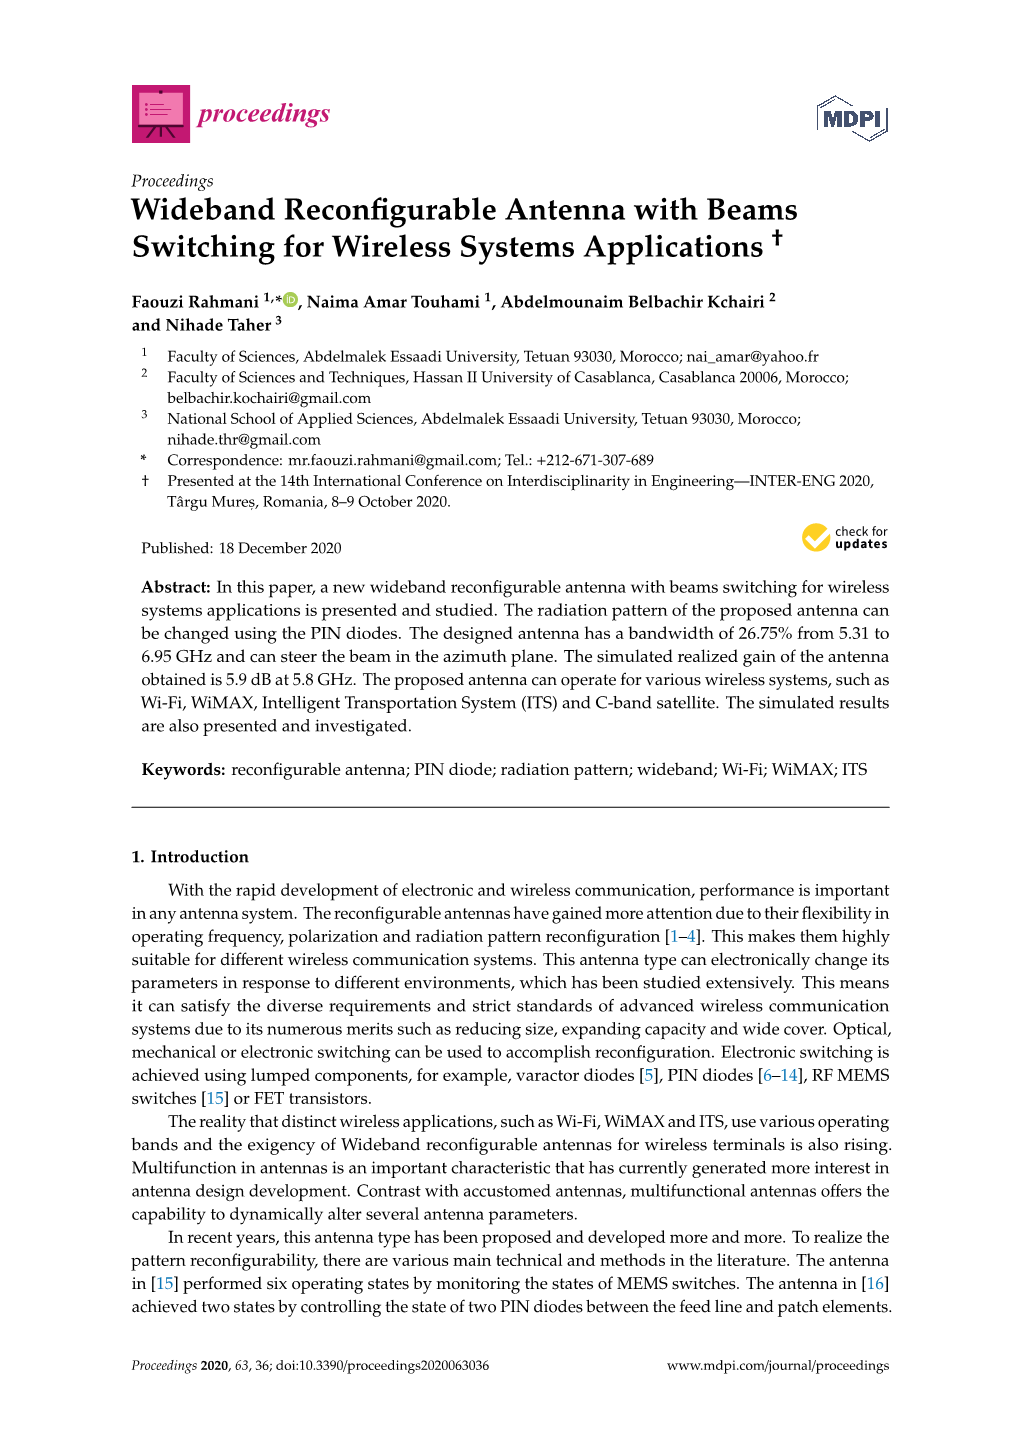 Wideband Reconfigurable Antenna with Beams Switching for Wireless